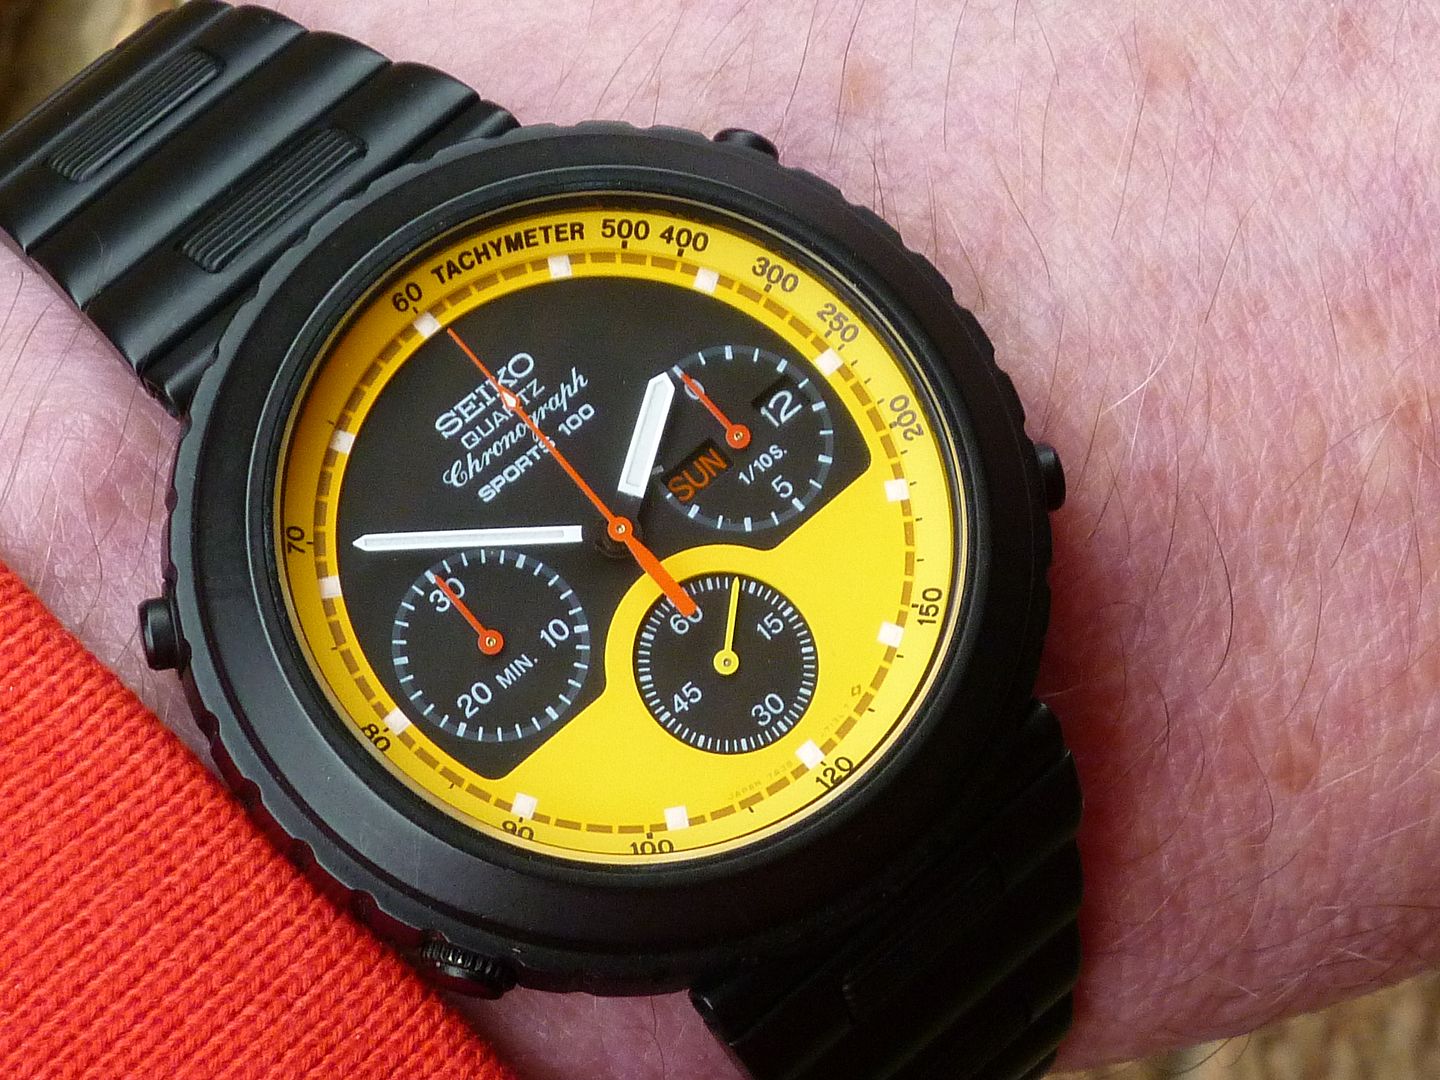 Whats your fav 7a28 / 7a38 watch? | Page 2 | WatchUSeek Watch Forums